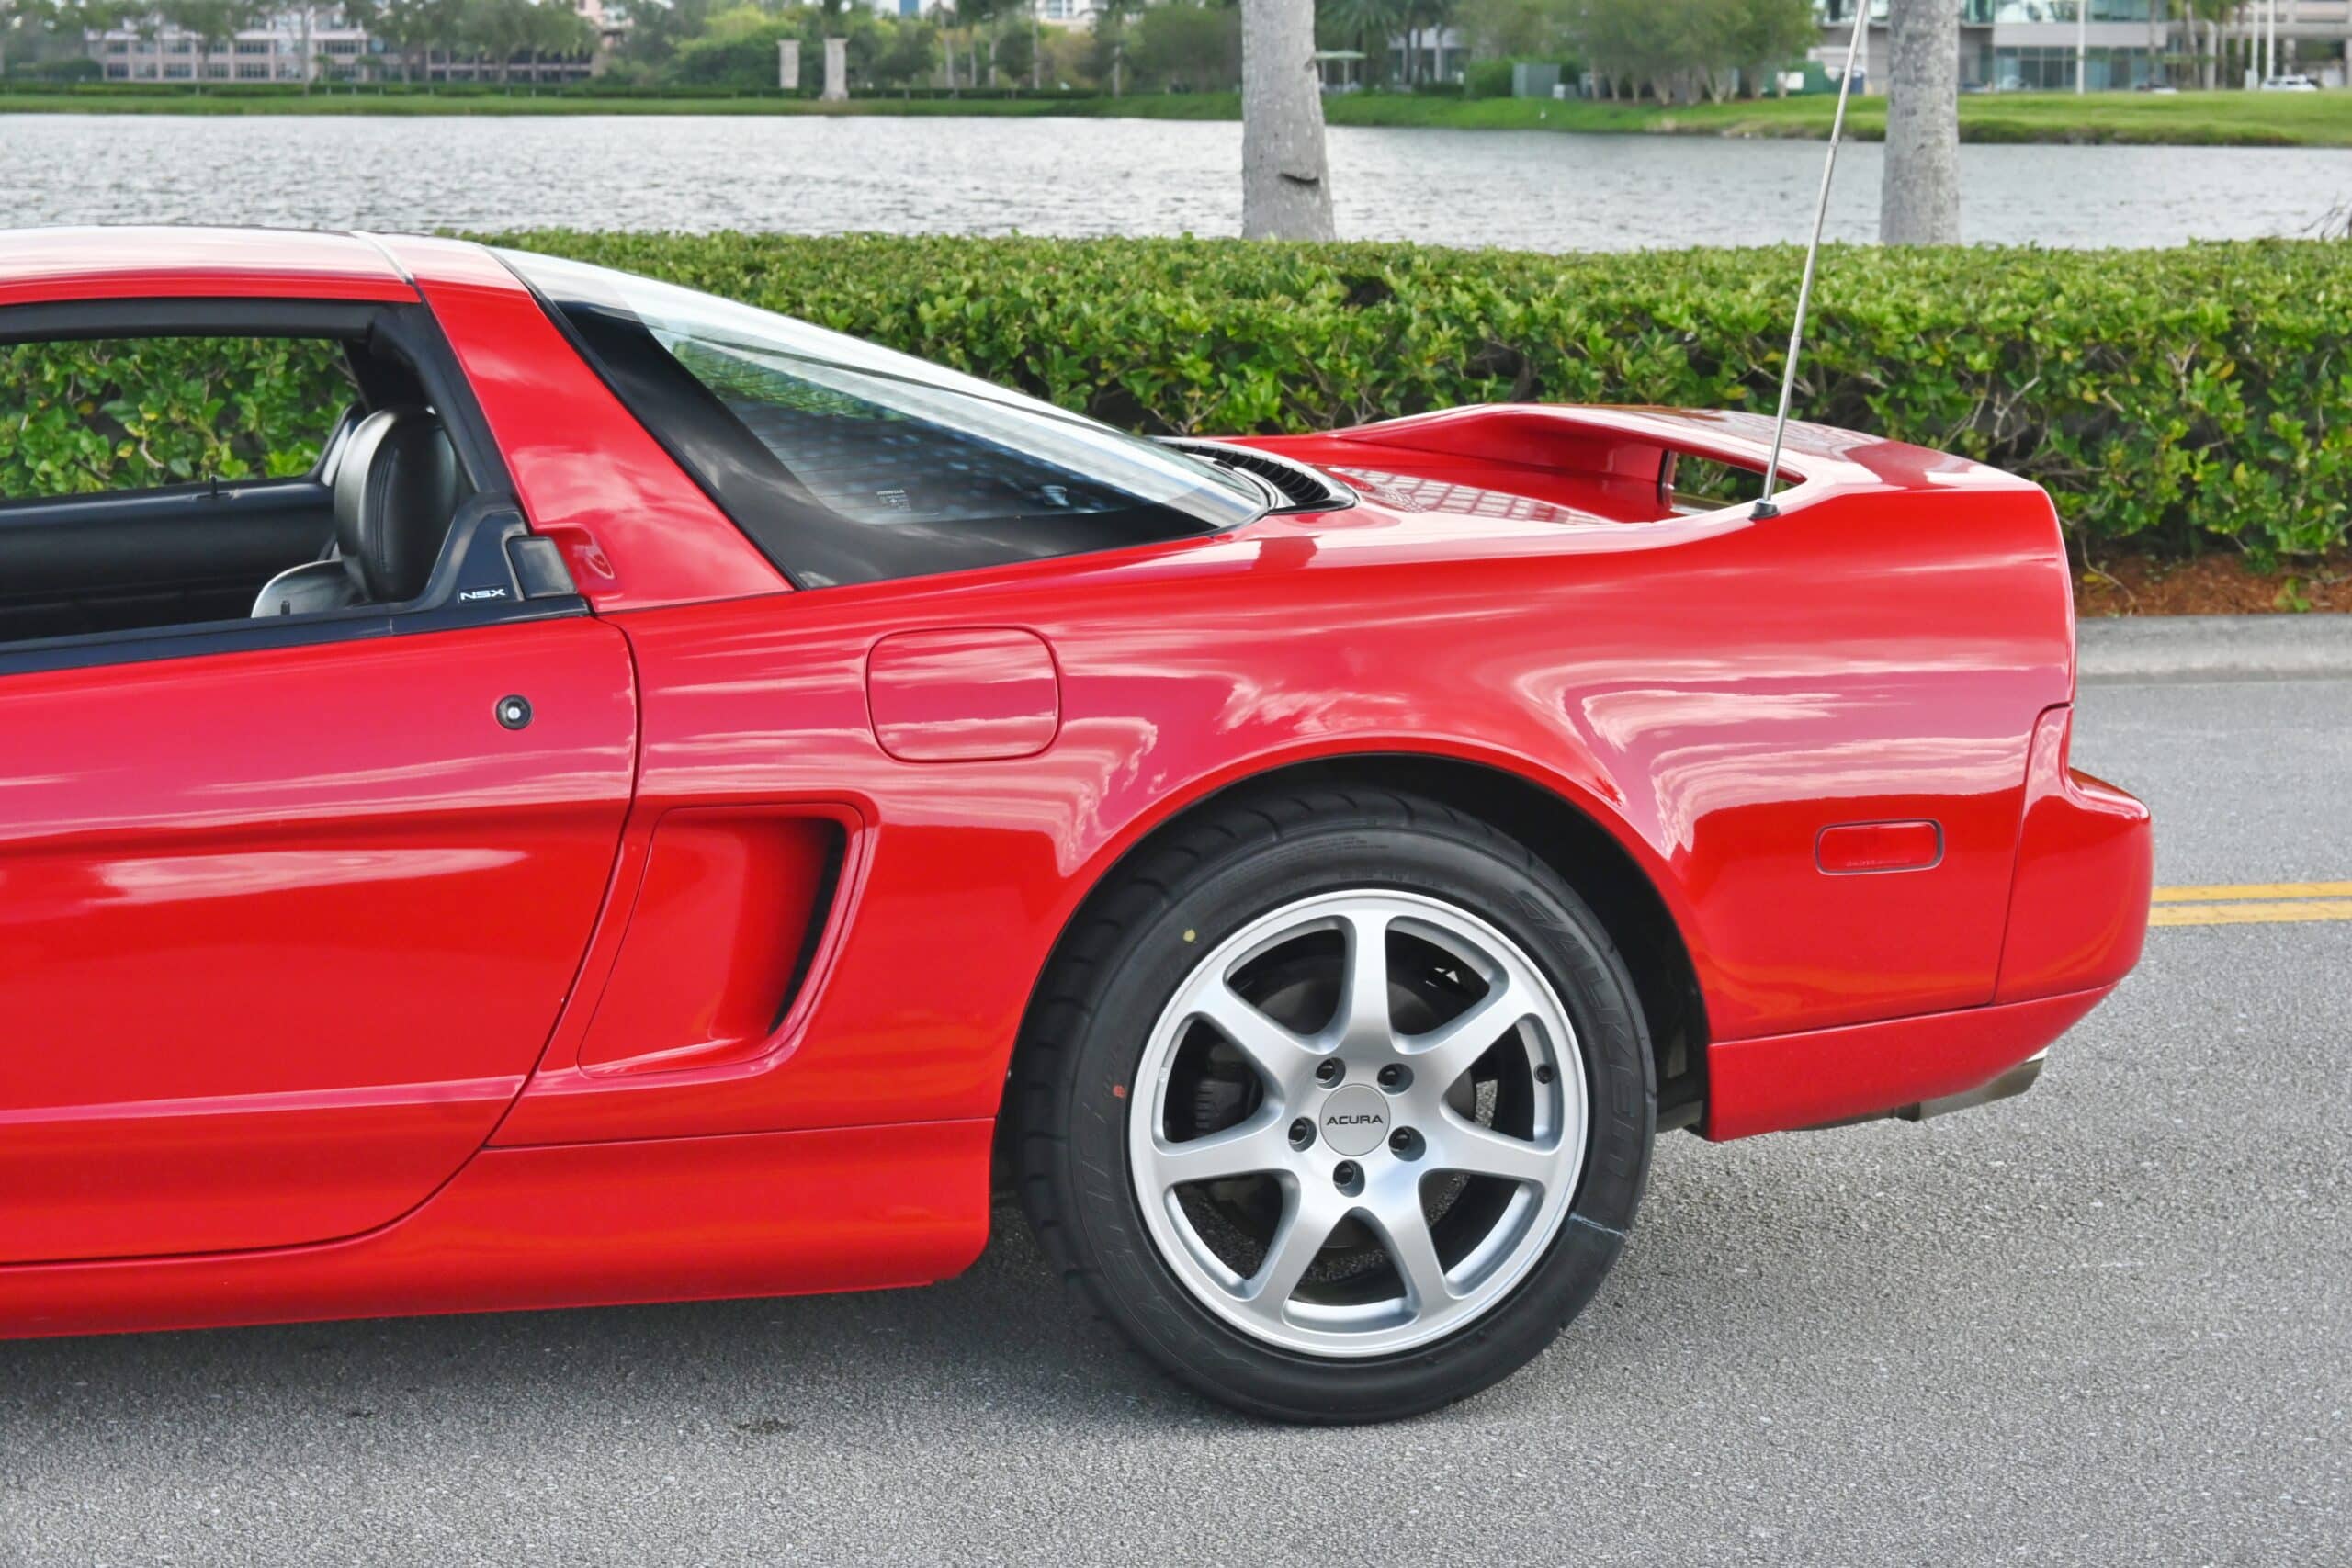 1996 Acura NSX-T Like New and original with ONLY 36k MILES – 5 Speed Manual – Timing belt done